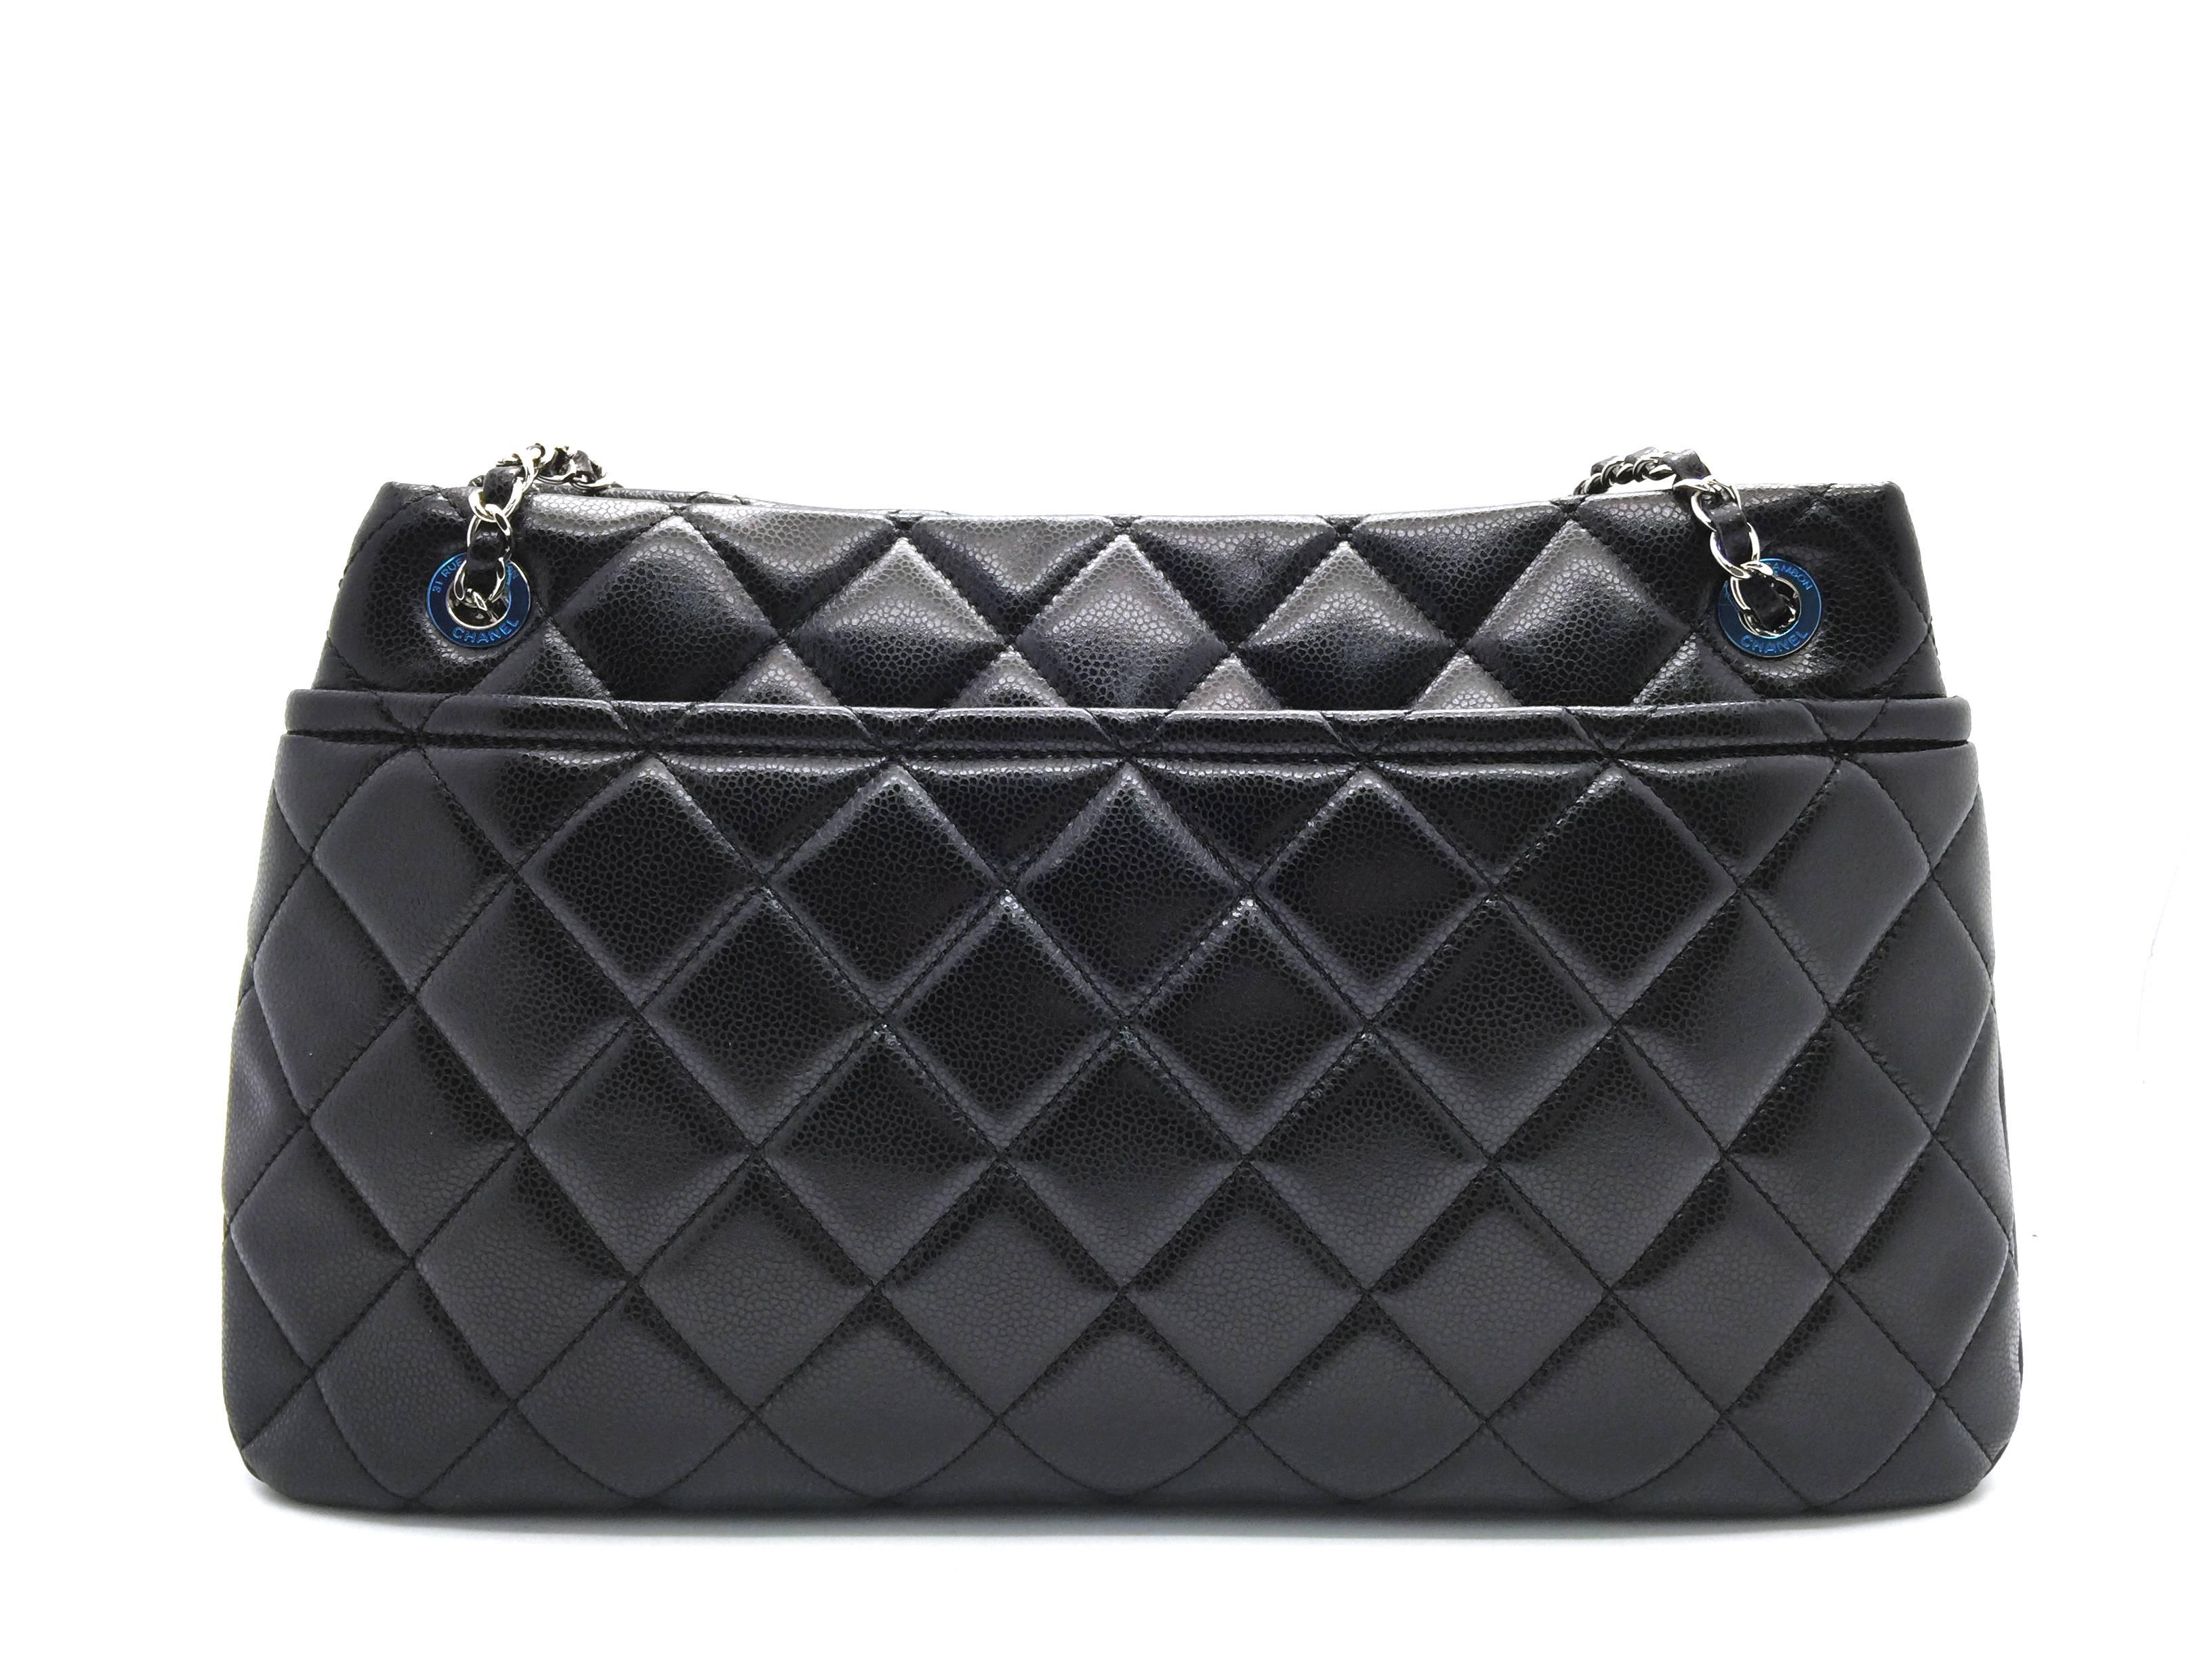 Women's Chanel Black Quilted Calfskin Leather Chain Shoulder Bag